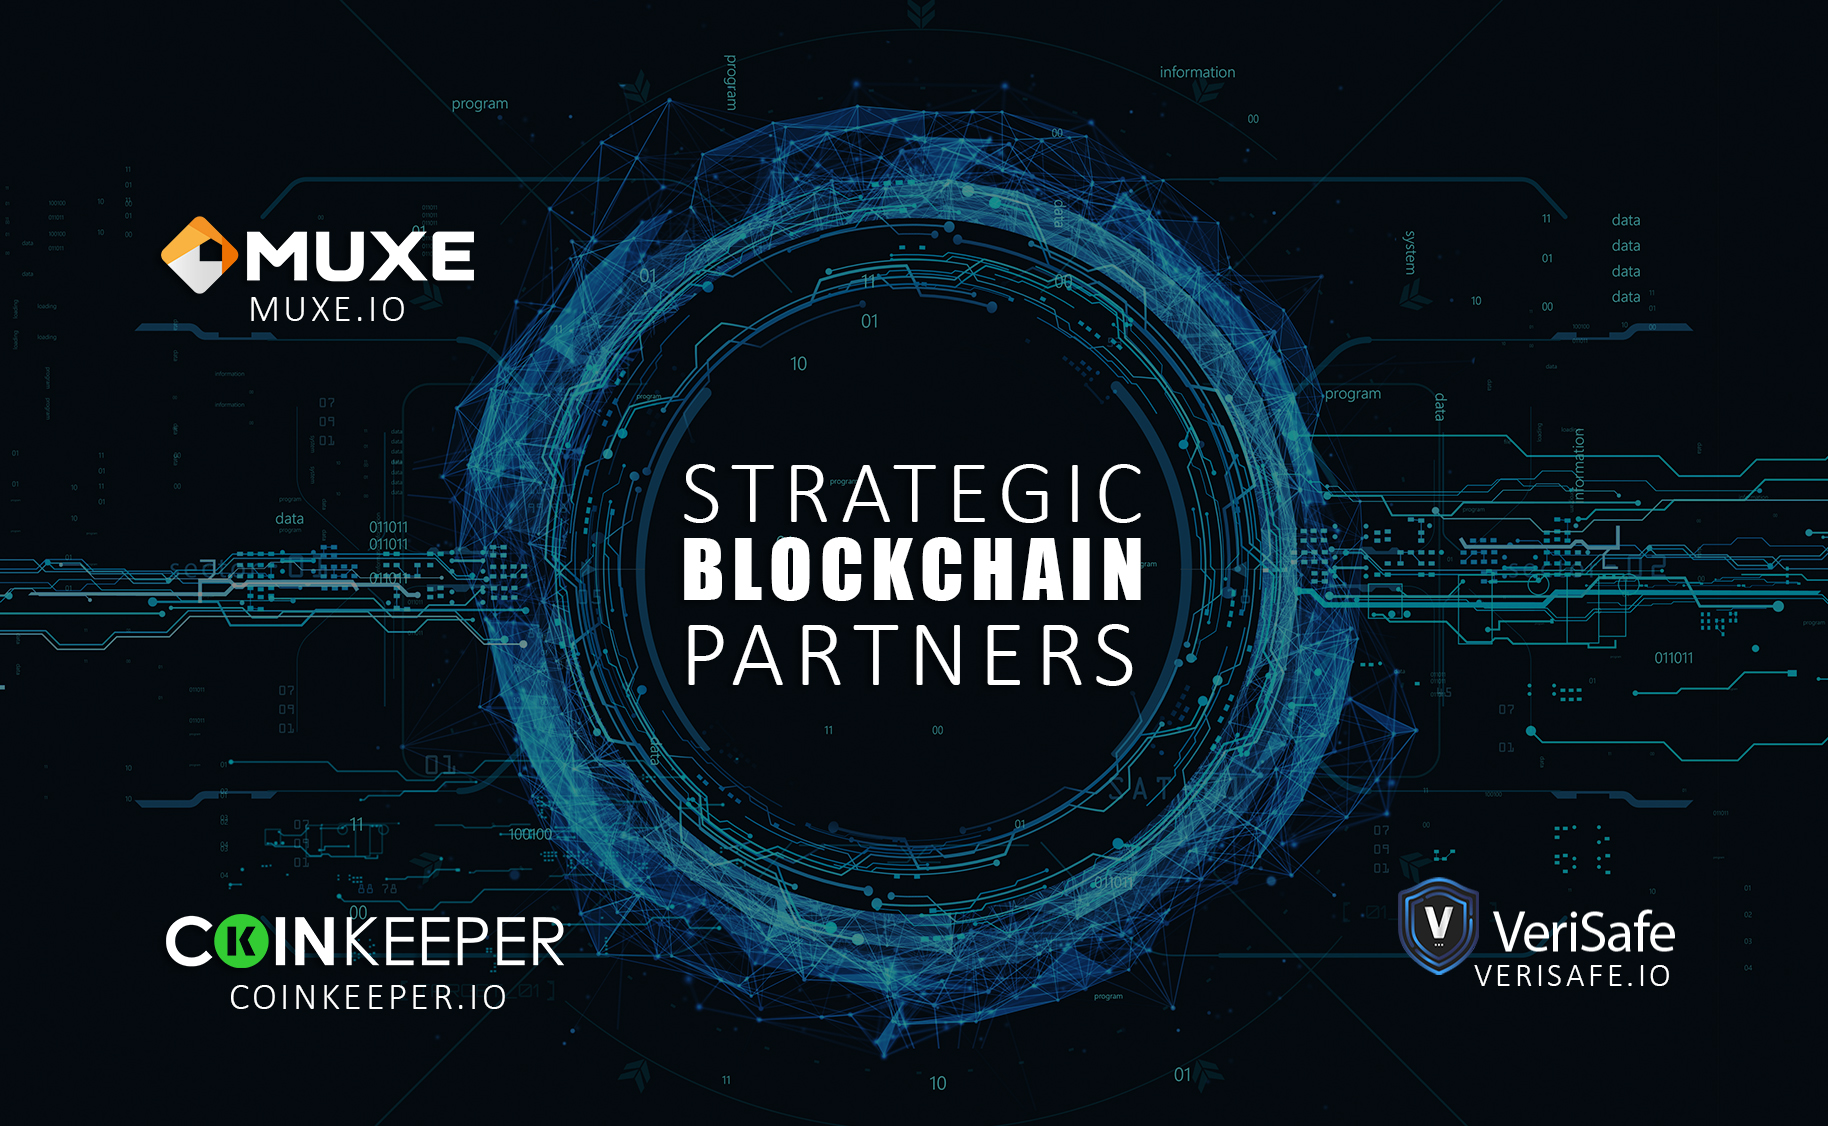 MUXE & Coinkeeper verify the Partnership with Verisafe and unite towards transparency & security of Cryptocurrency/Blockchain